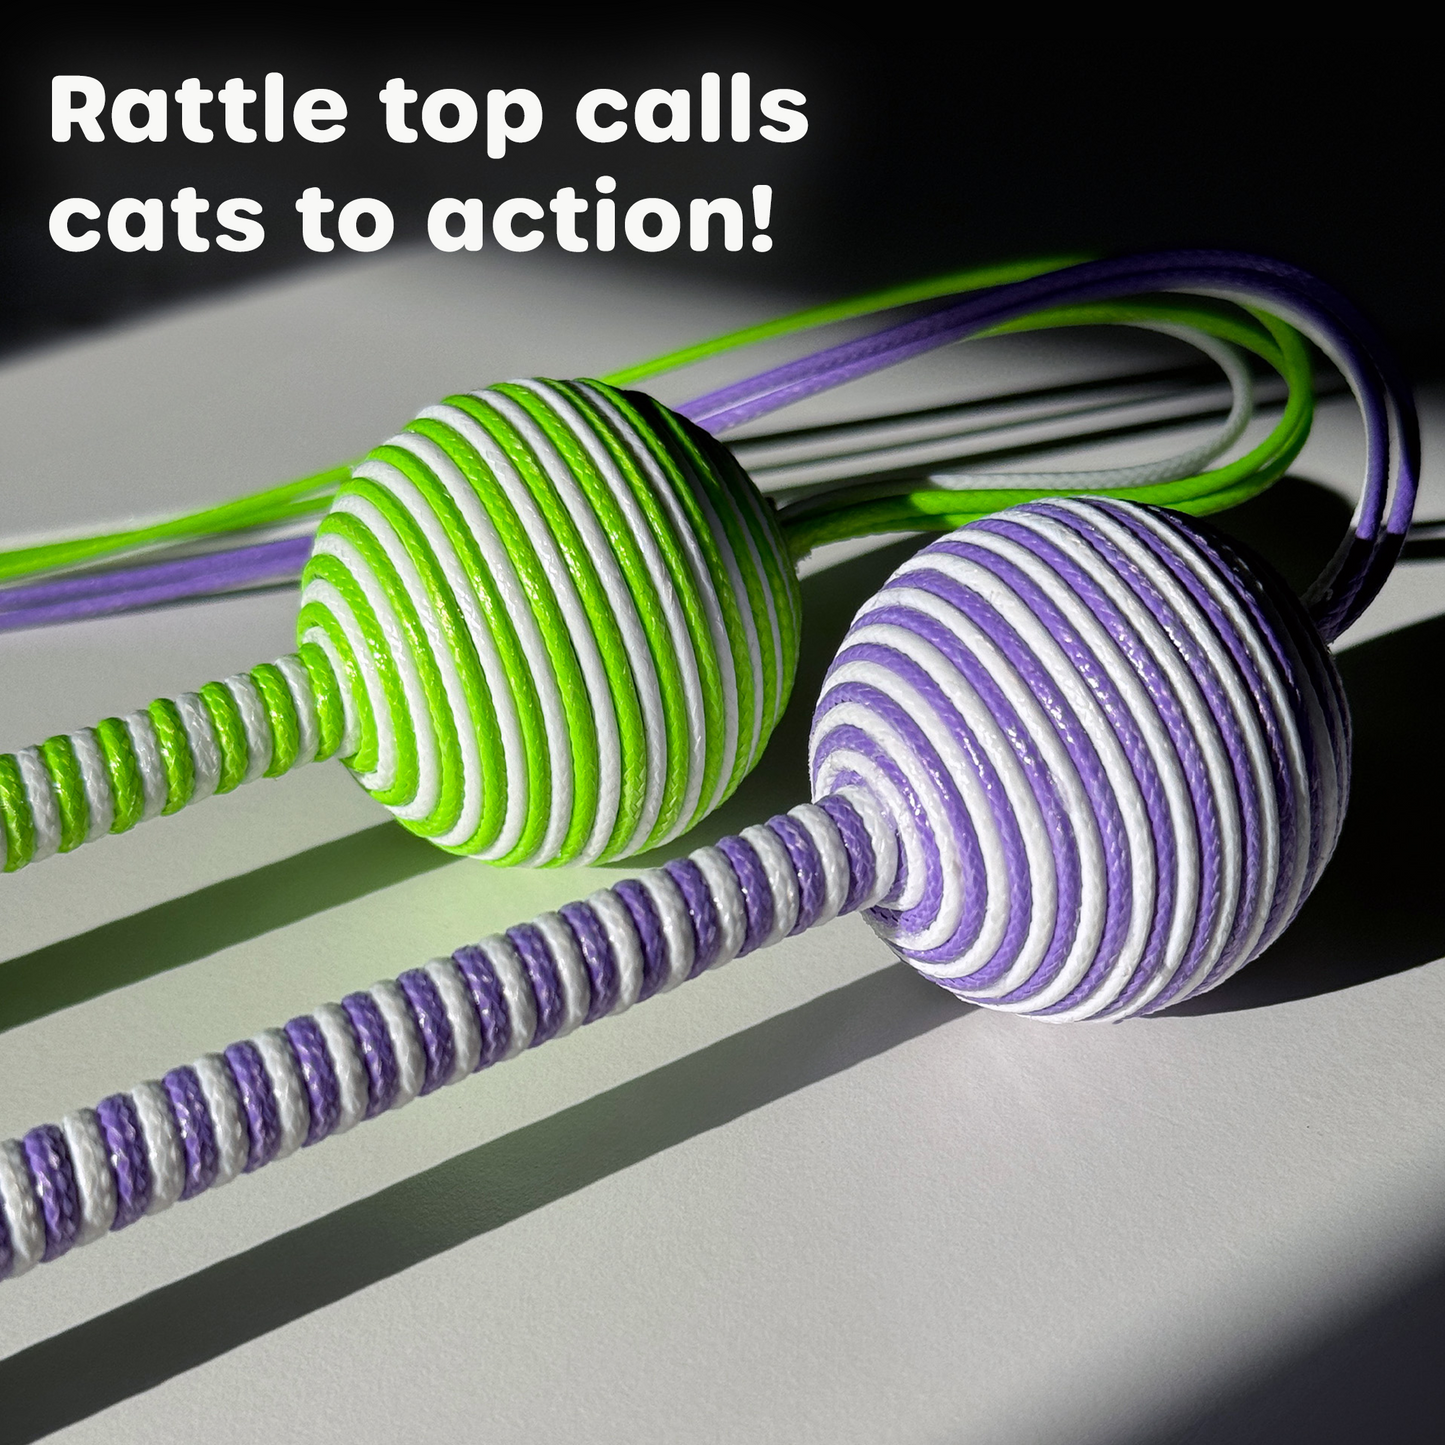 Close-up image showing the green and purple rattle tops of the Wiggle Wand™ Cat Toys side by side, with text 'Rattle top calls cats to action!' displayed at the top, highlighting the toy's engaging sound feature.